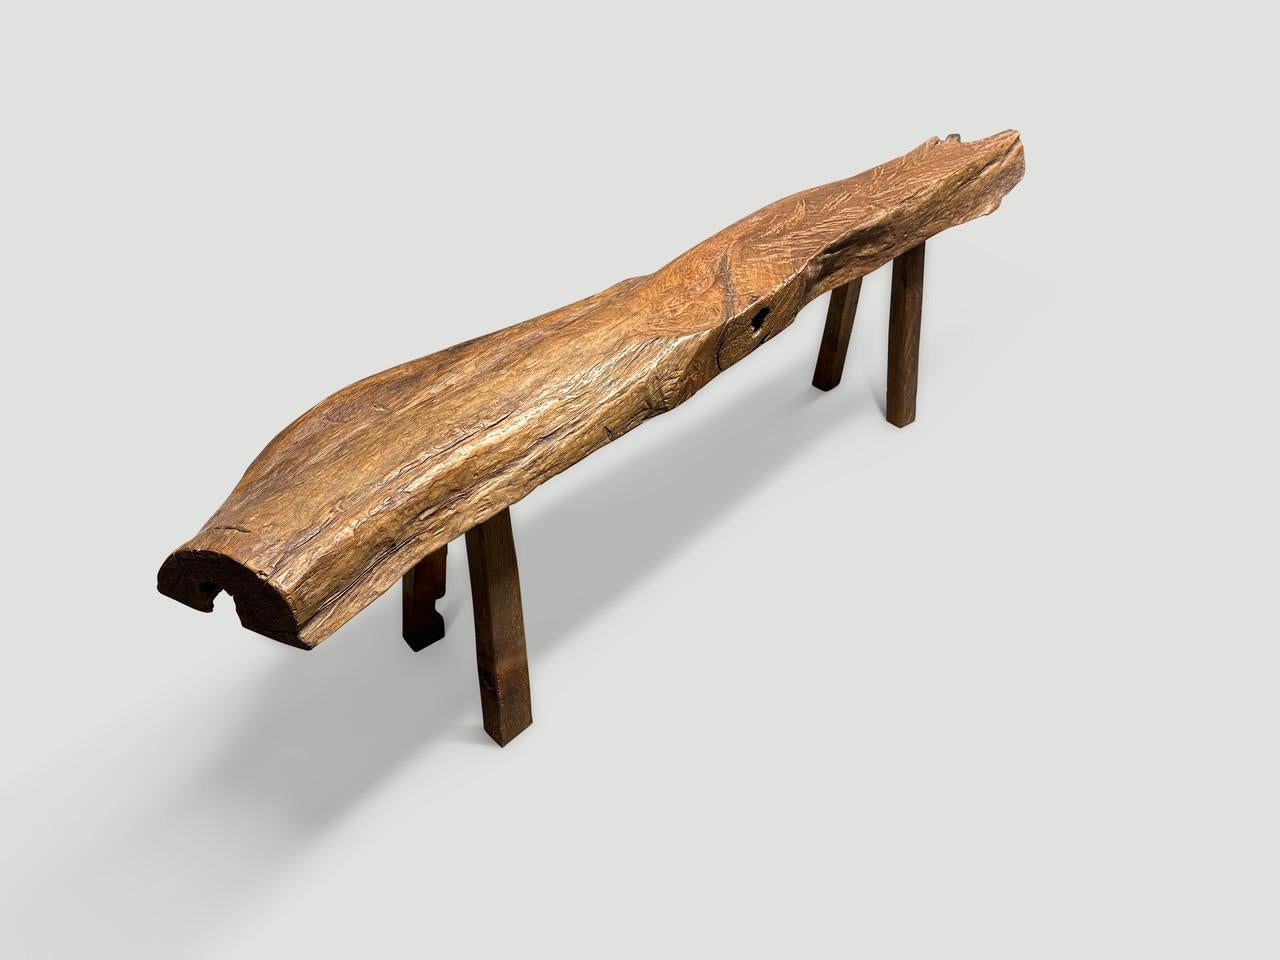 Andrianna Shamaris Antique Sculptural Teak Wood Bench In Excellent Condition For Sale In New York, NY